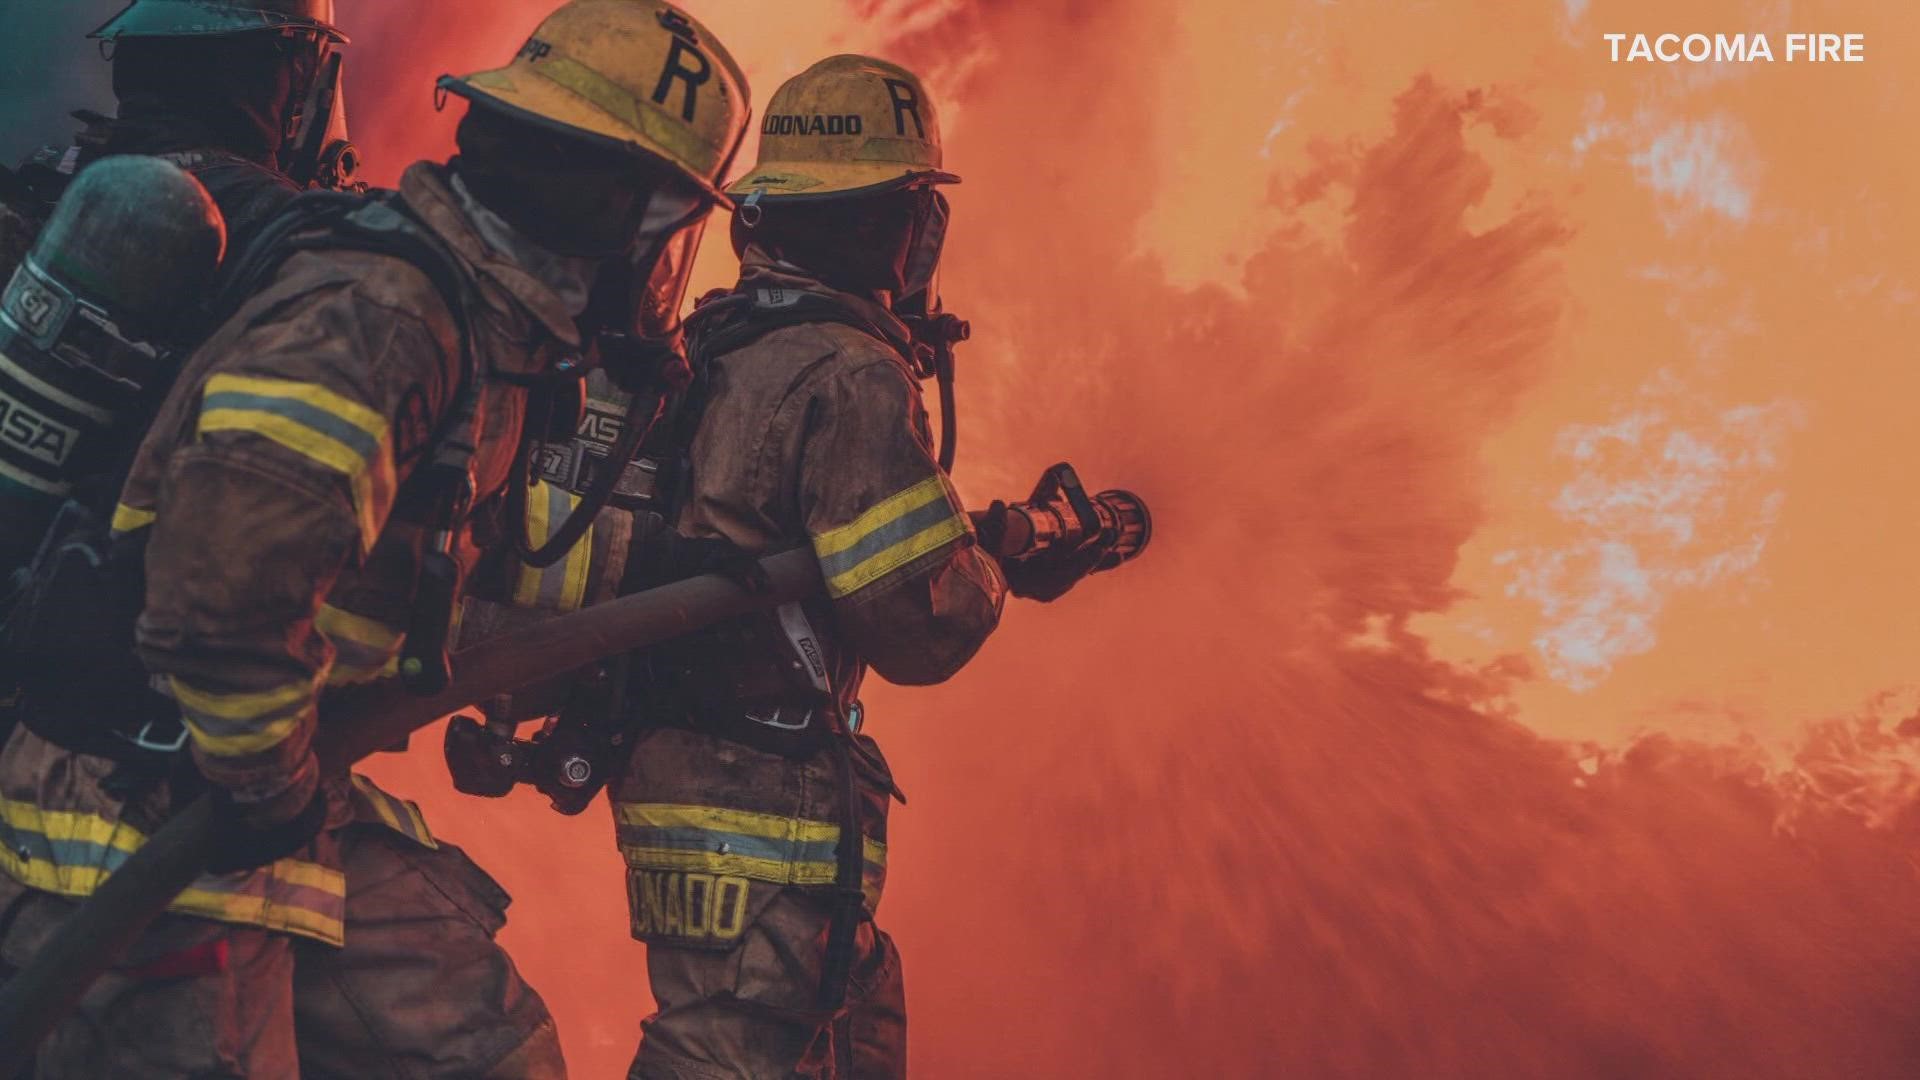 The Tacoma Fire Department aims to break down the stigma of seeking mental health help in an hour-long documentary titled, "The Call We Carry."